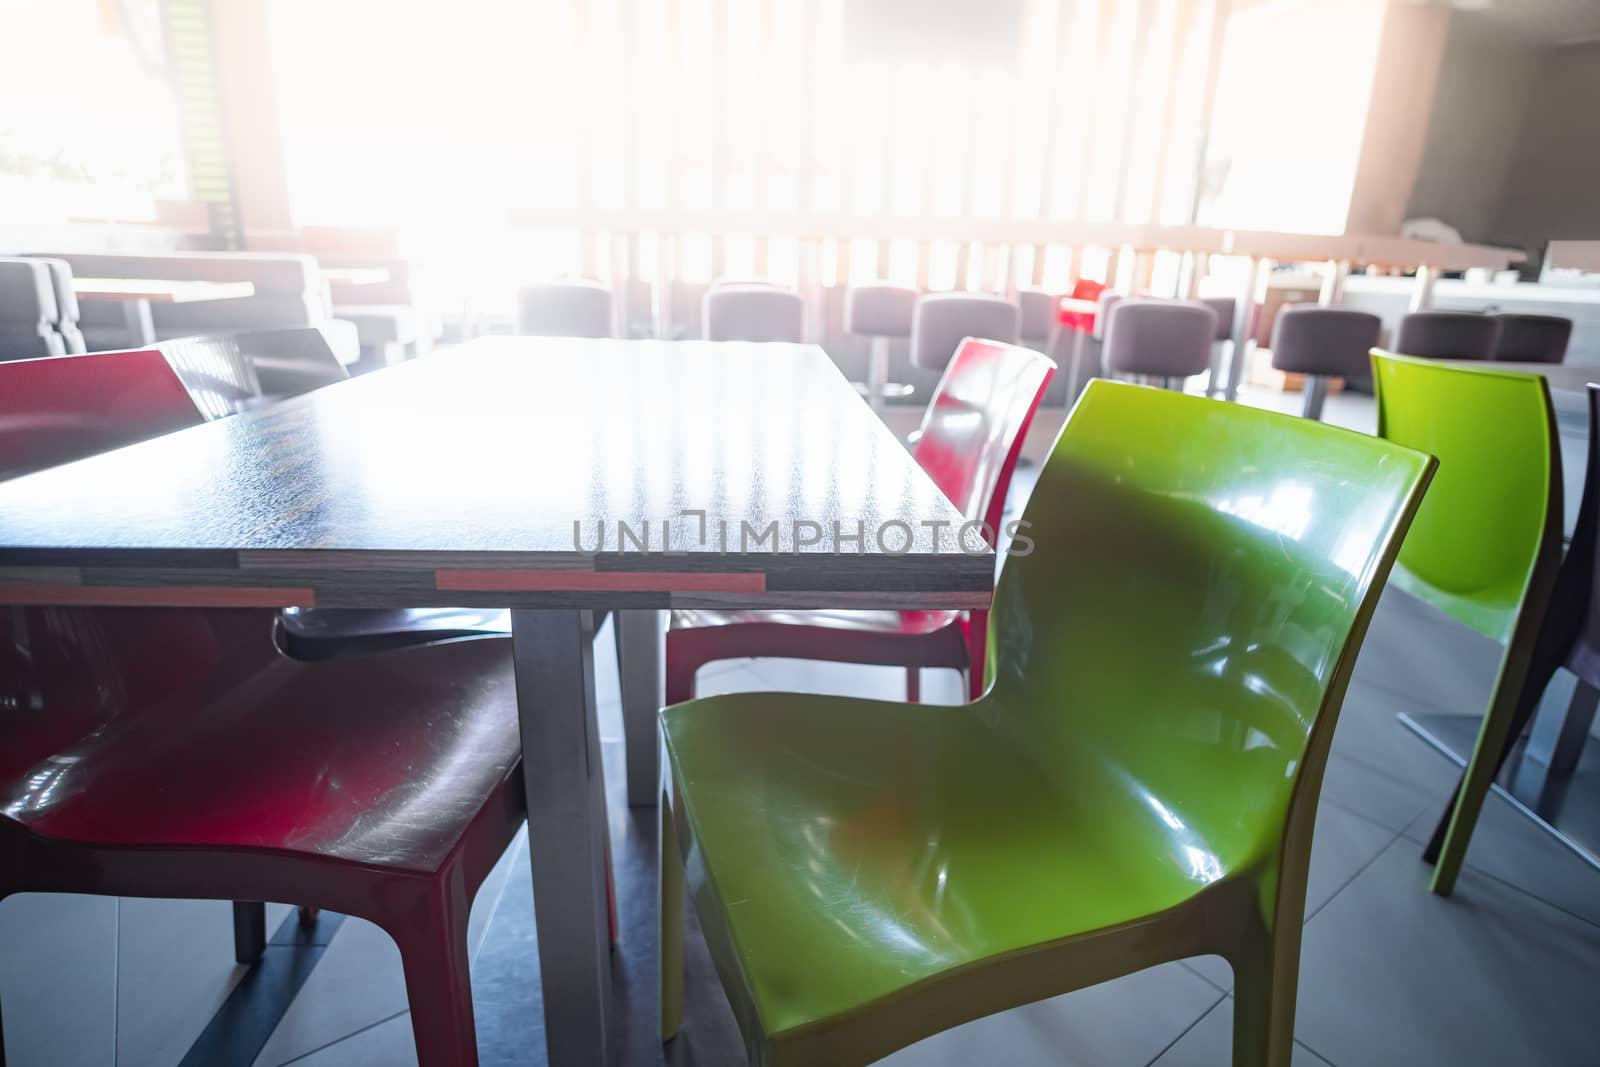 Empty food court at shopping centre or airport. Clean table and chairs against the bright light, generic interior, concept of lockdown due to quarantine